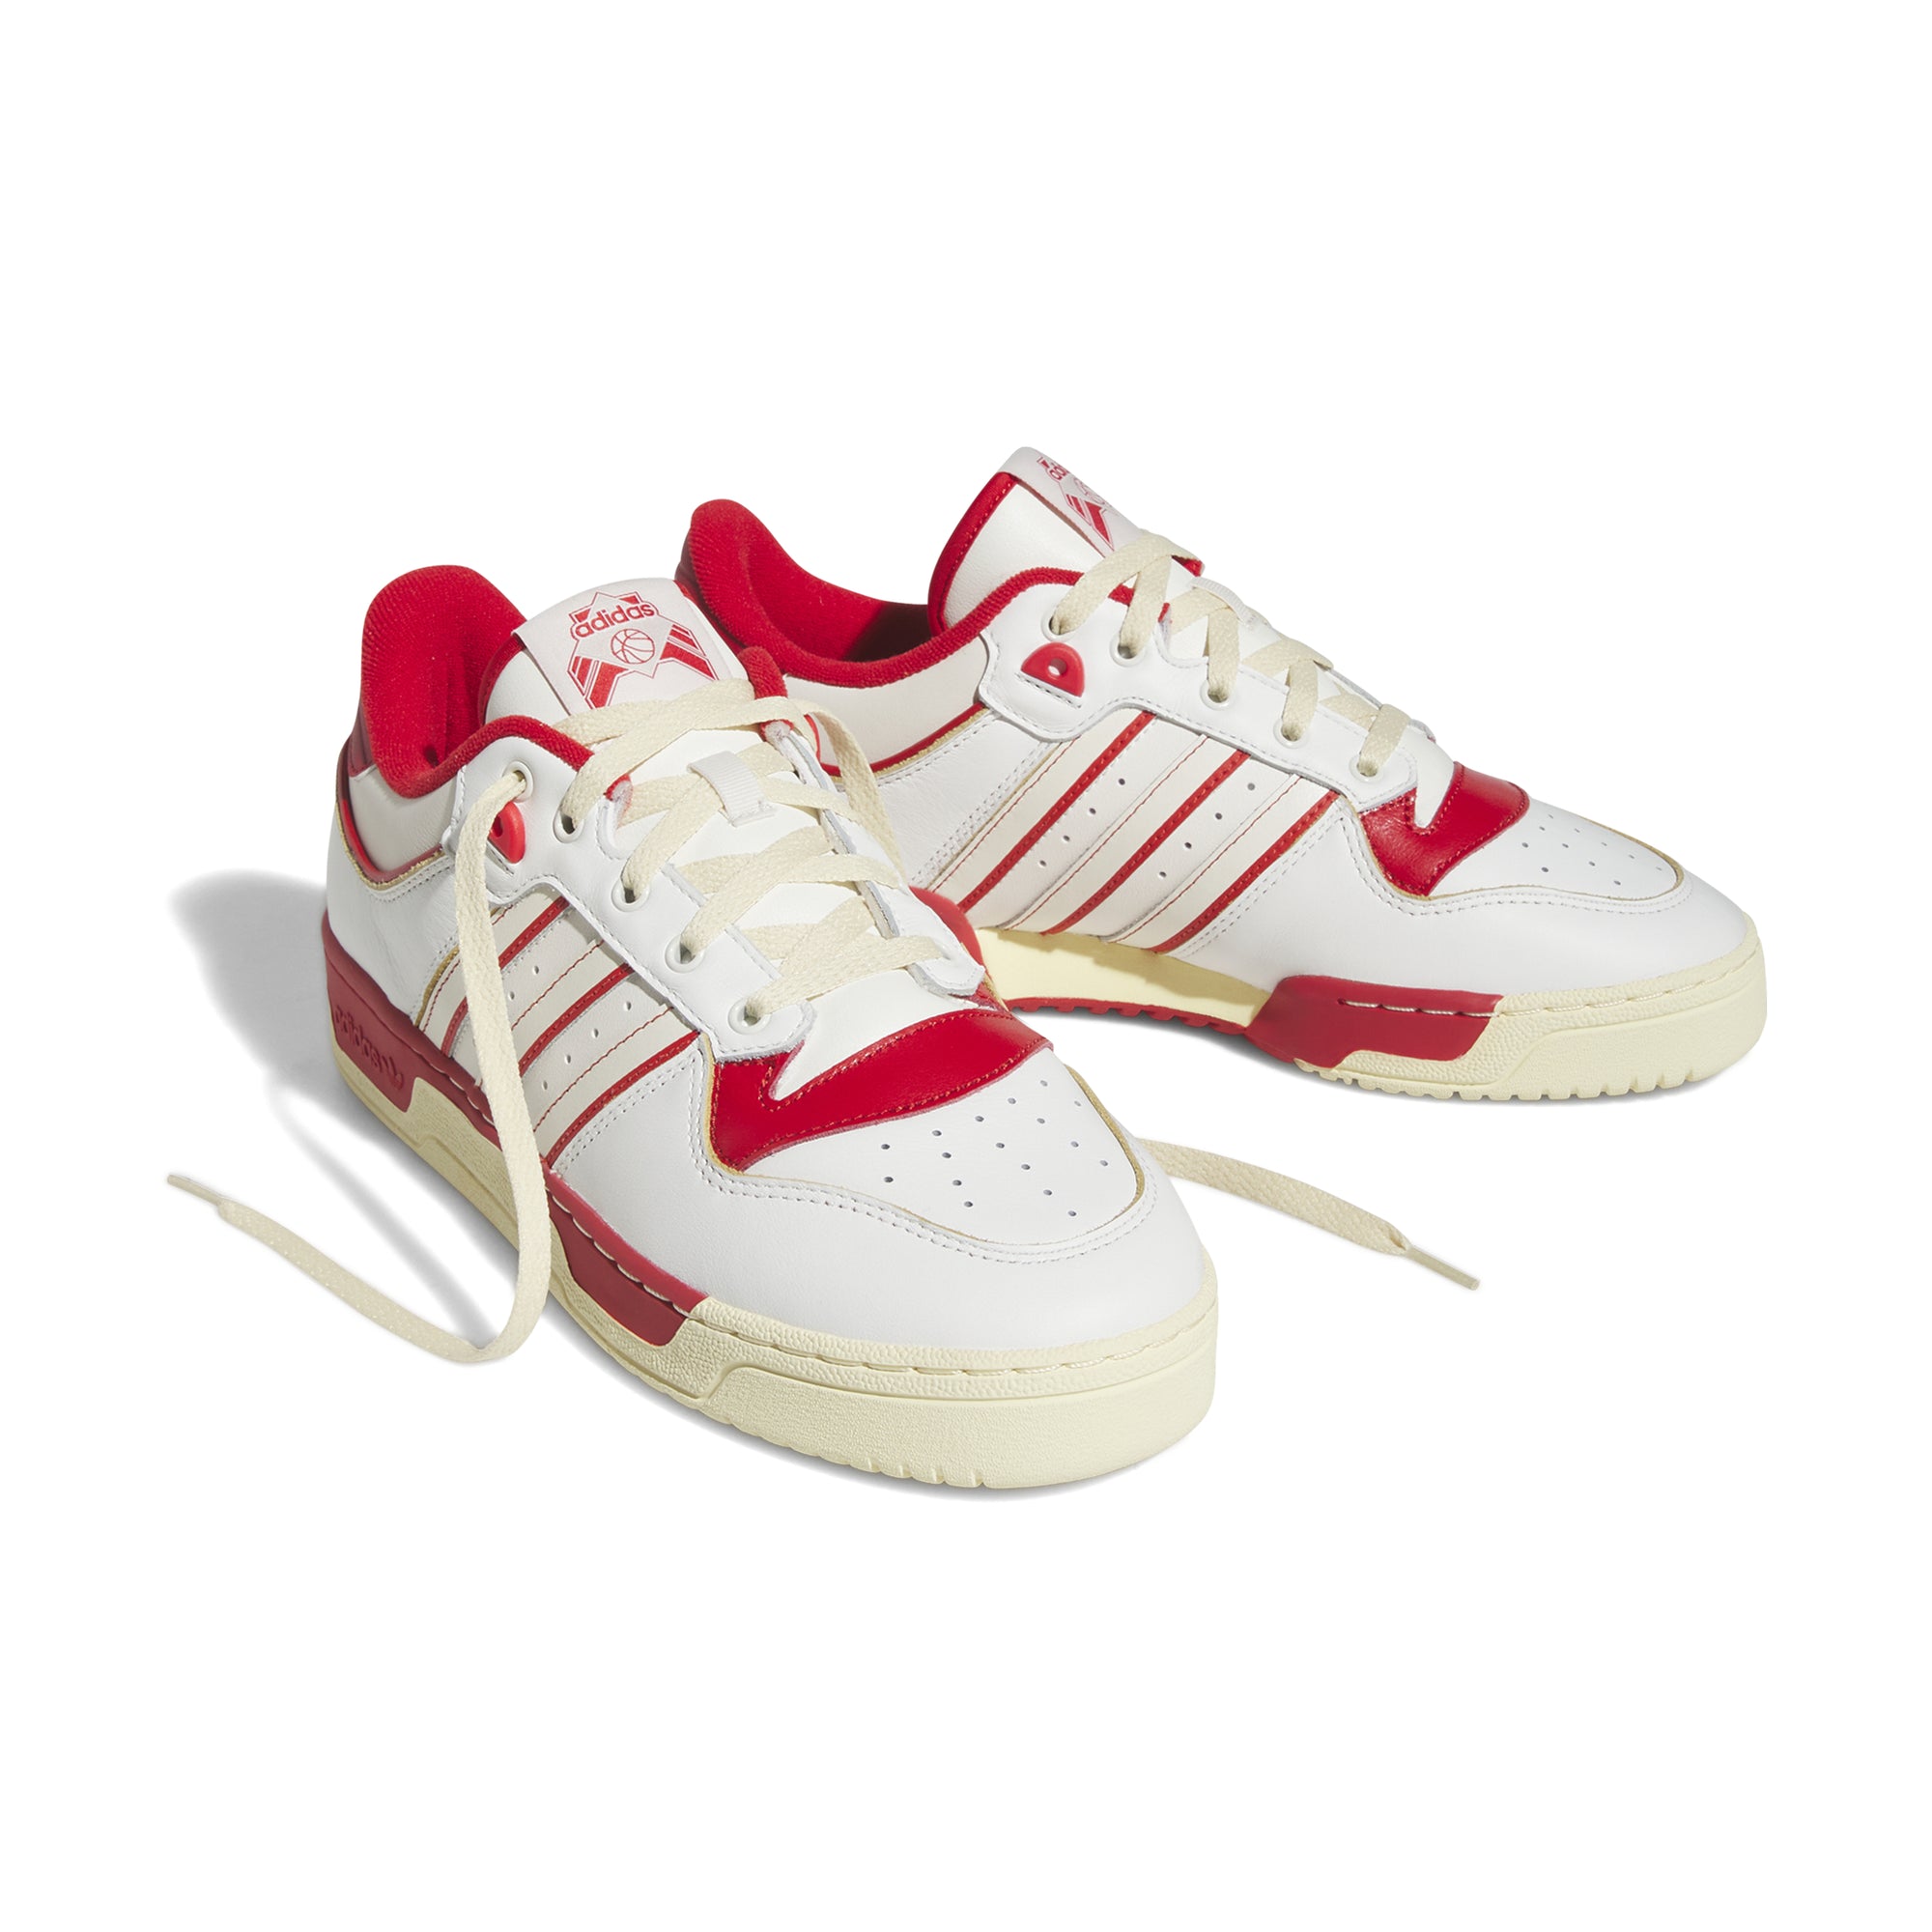 ADIDAS RIVALRY LOW WHITE RED - Warrior